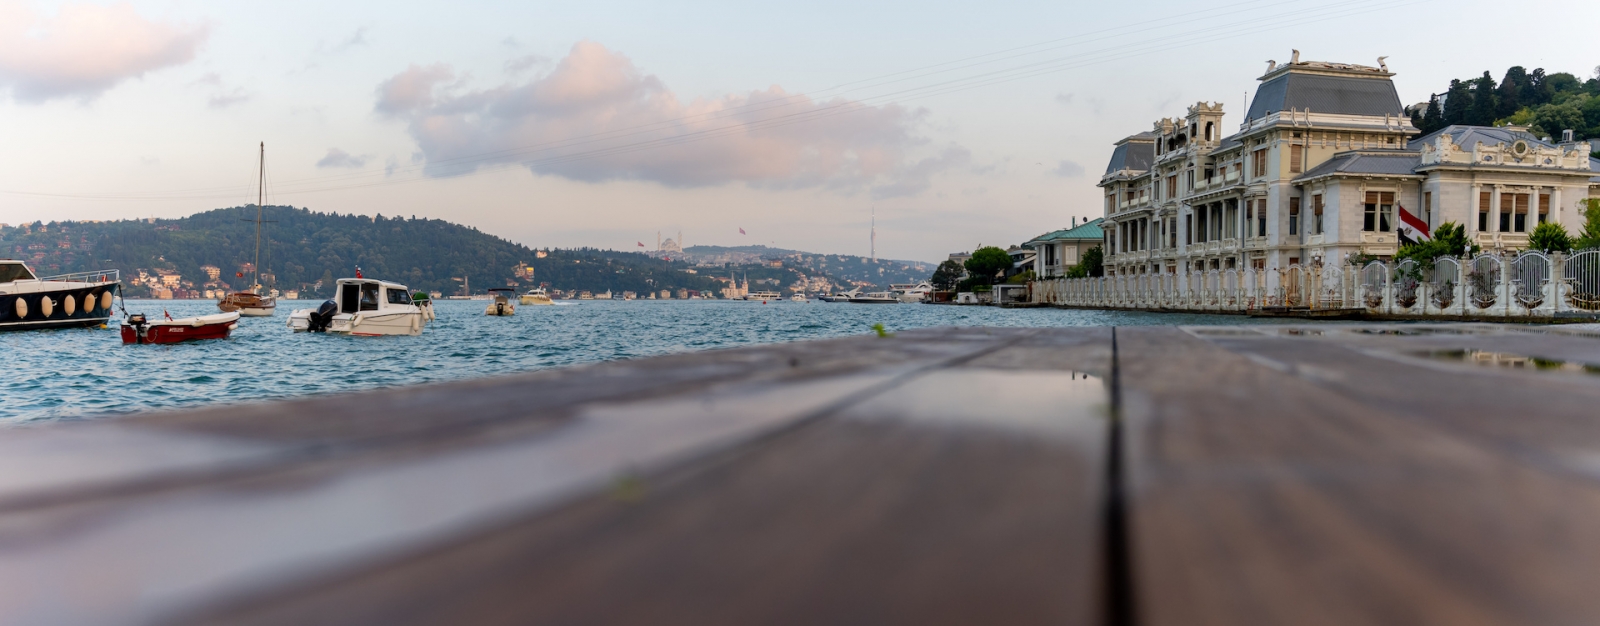 View of the Bosphorus, boats, courtyard bench, and historical mansions from the beach. Bebek beach. Besiktas Istanbul Turkey